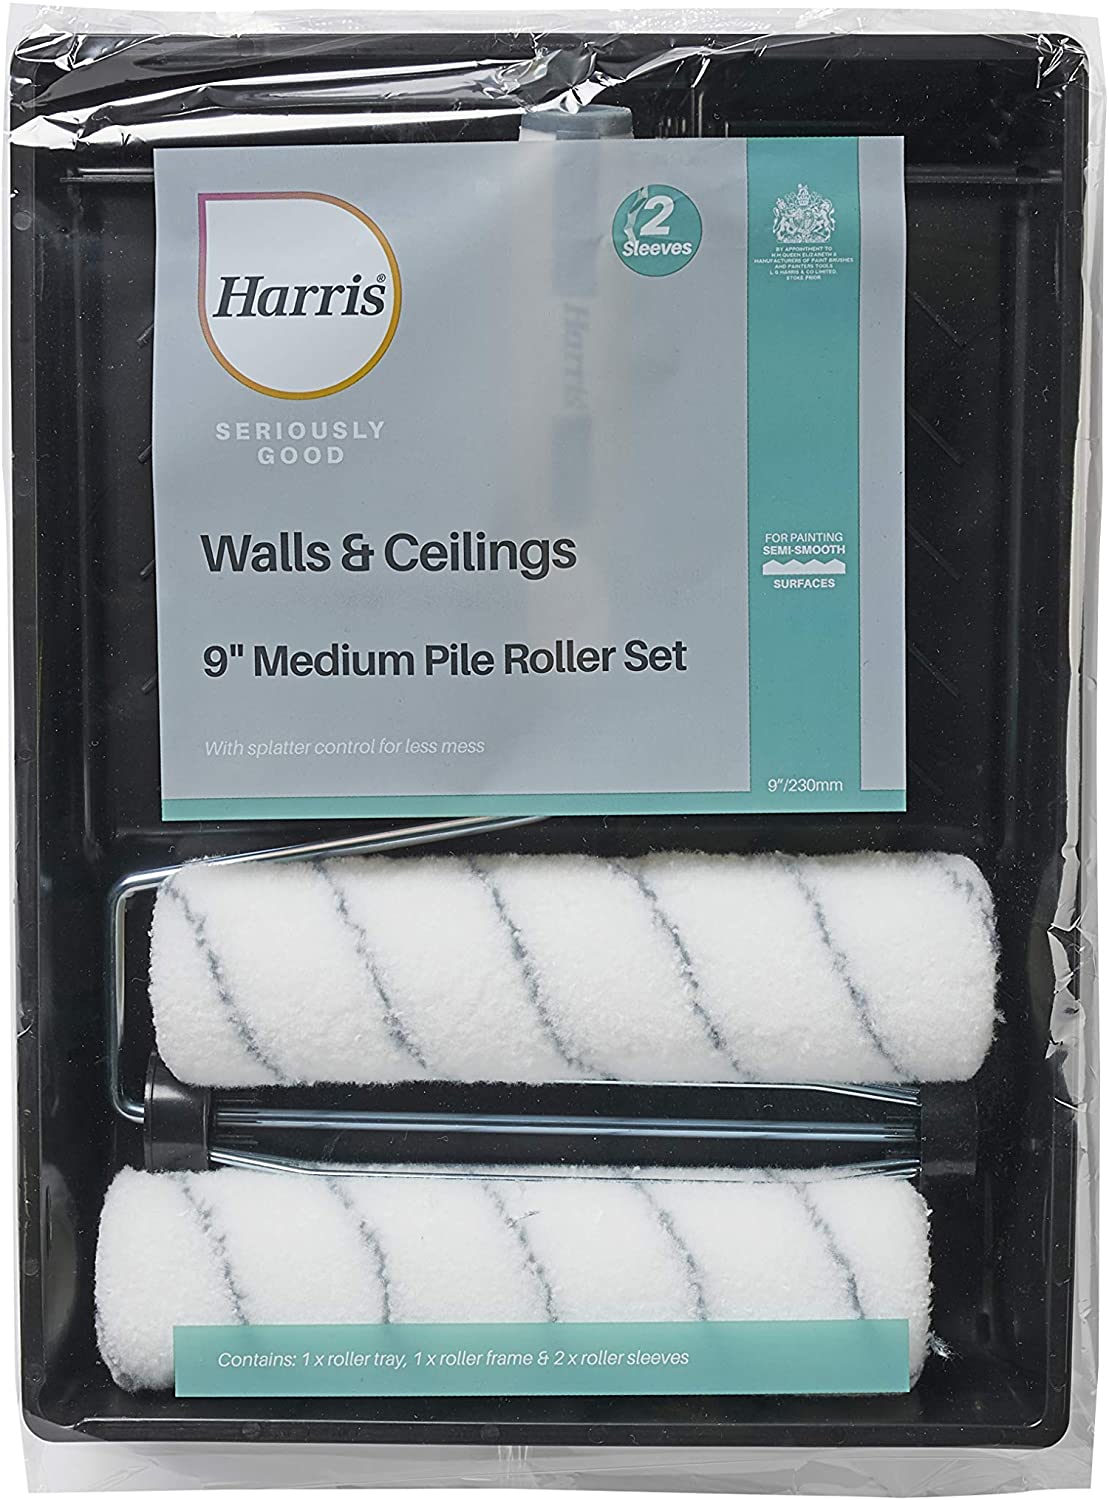 Seriously Good Walls & Ceilings Twin Medium Pile Roller Set 9in